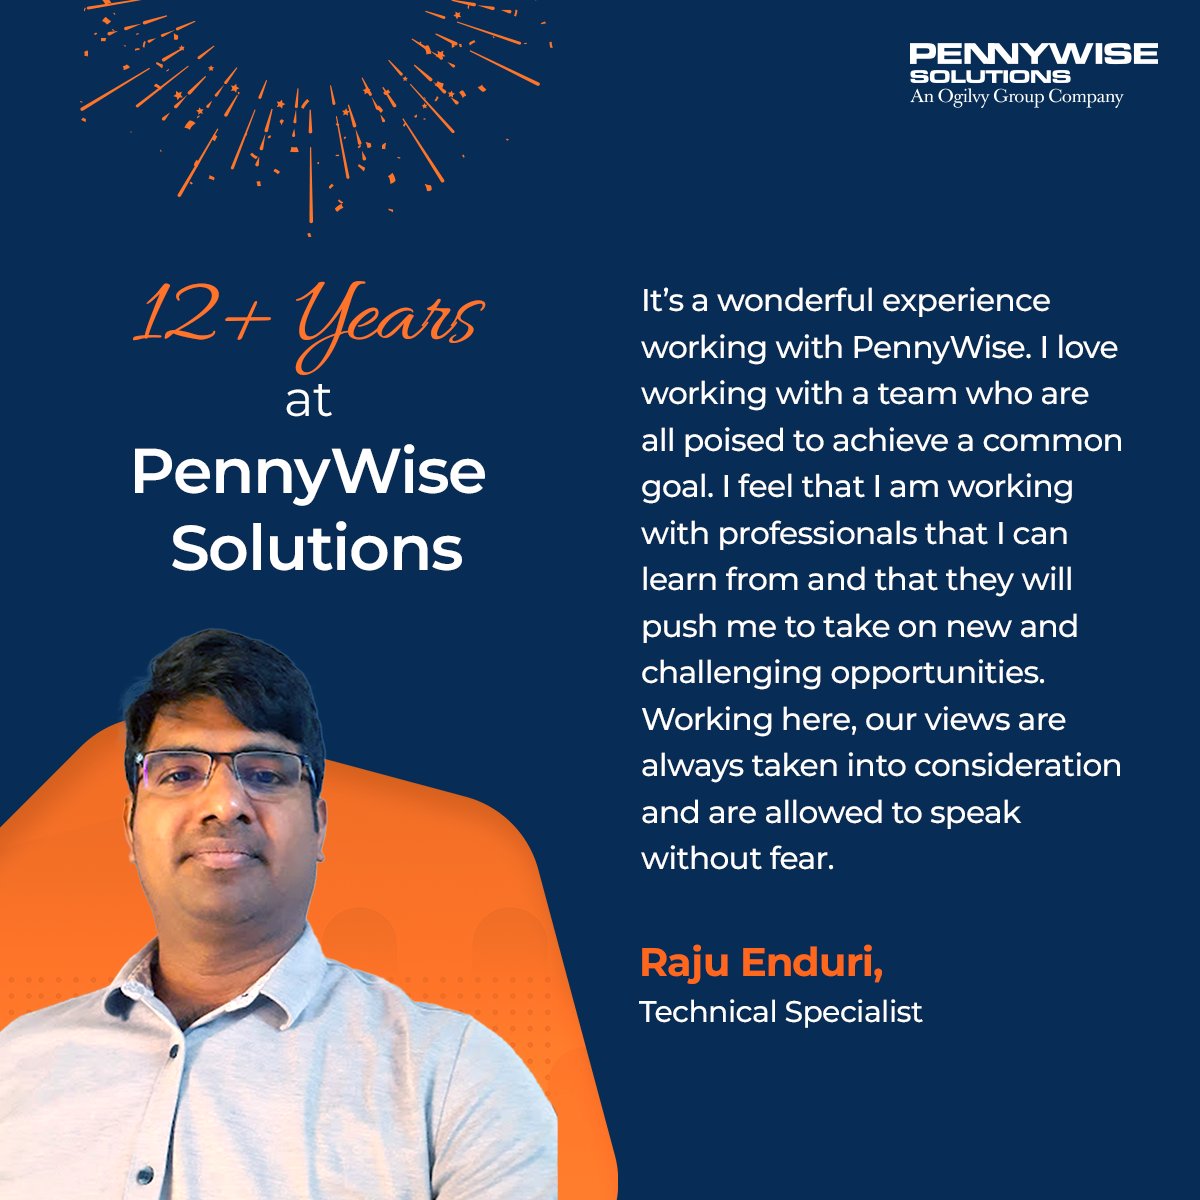 Happier employees mean happier customers. This is what Raju Enduri has to say about working at PennyWise. #PennyWise #PennyWiseSolutions #OgilvyGroup #DigitalTransformation #EmployeeStories #Technology #Testimonials